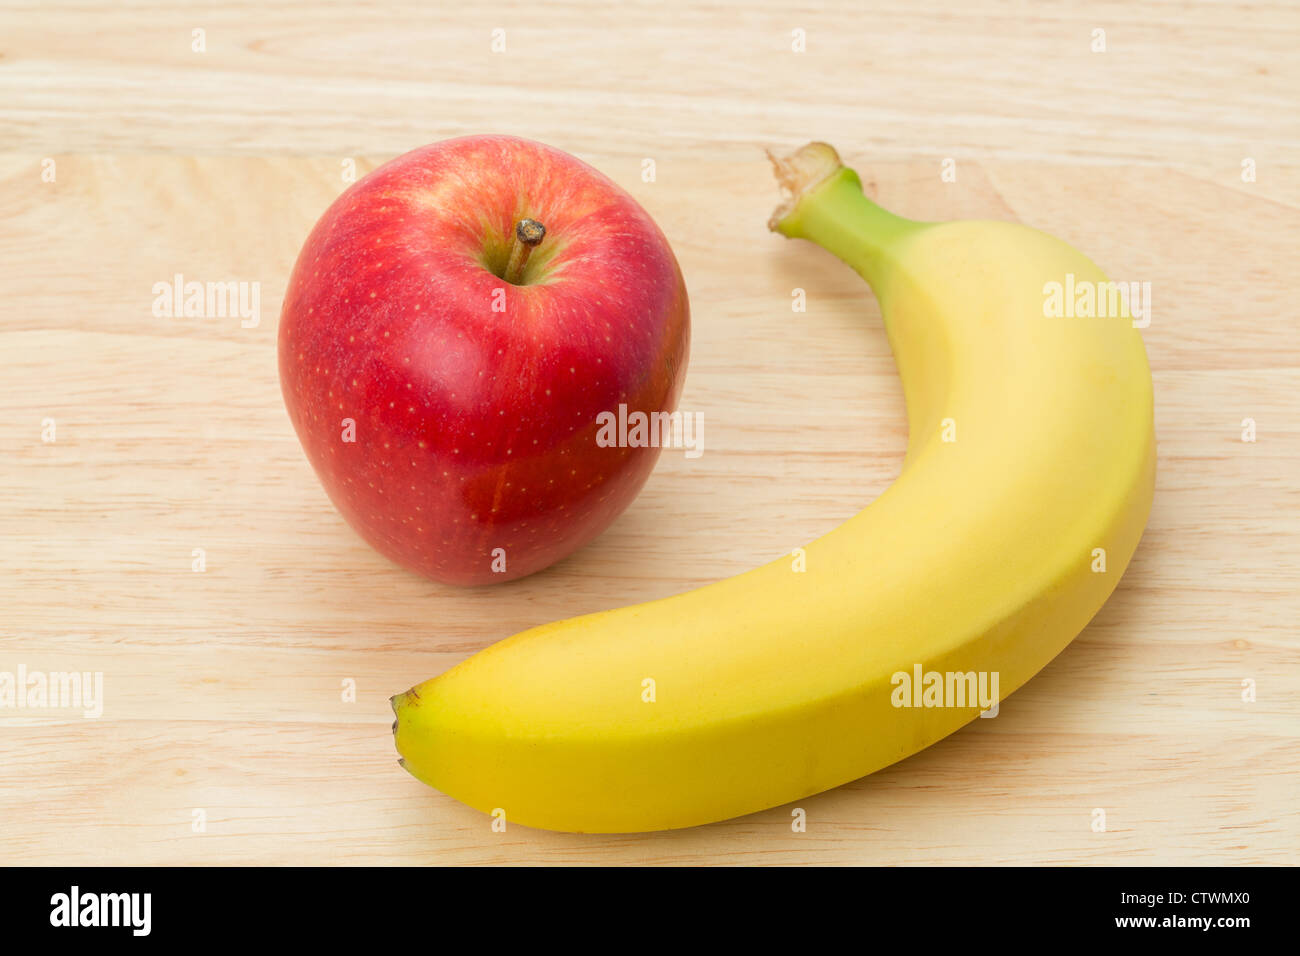 An apple and a banana placed on a table - studio shot Stock Photo